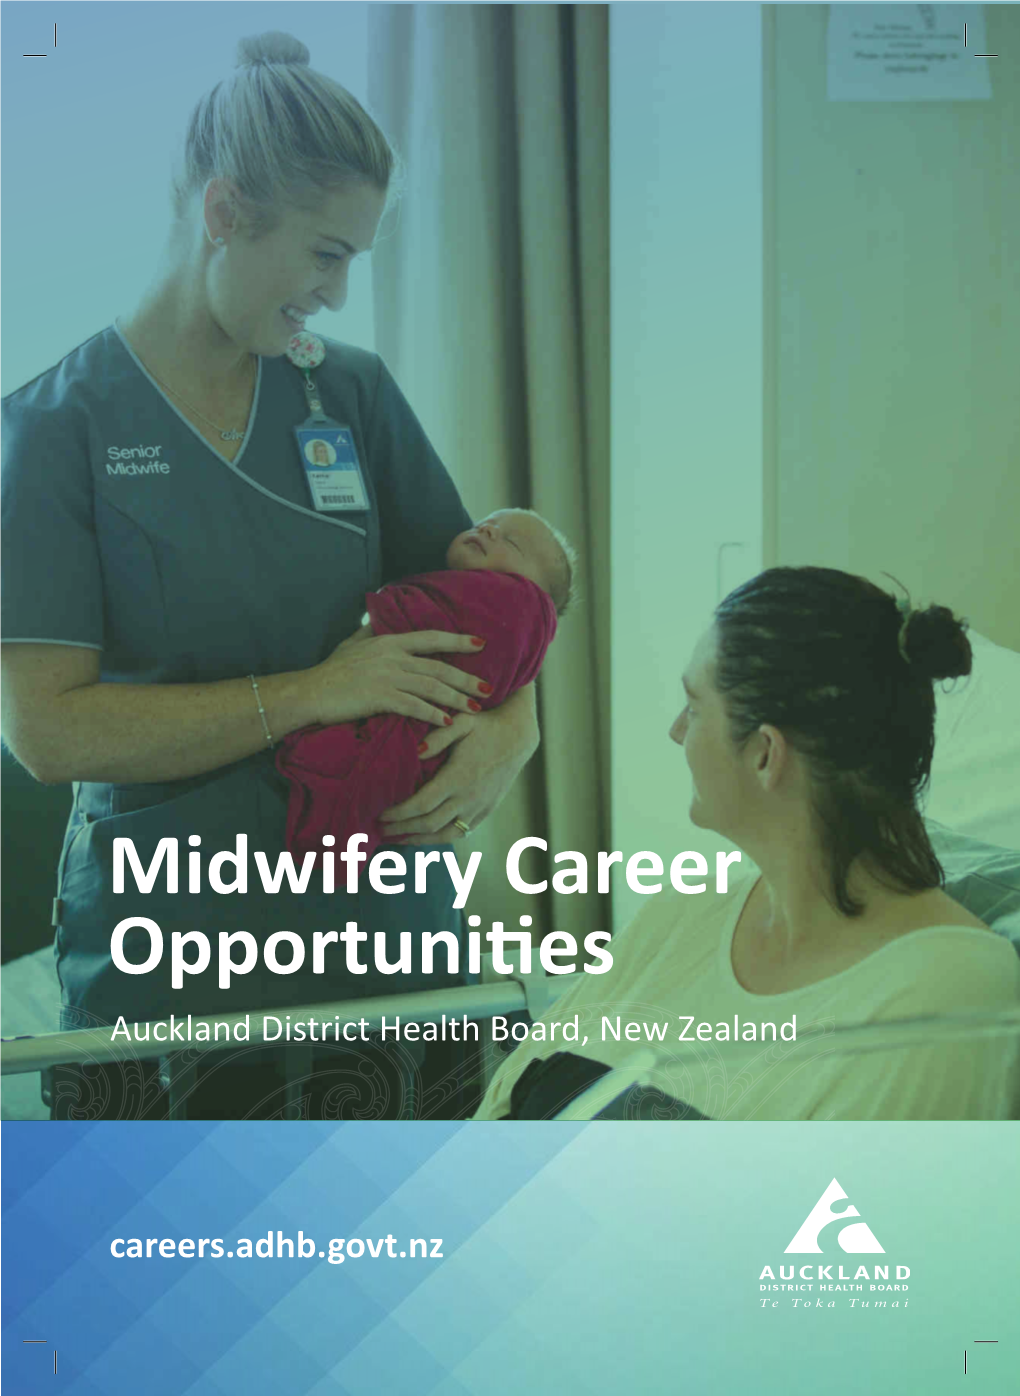 Download ADHB Midwifery Careers Information Pack